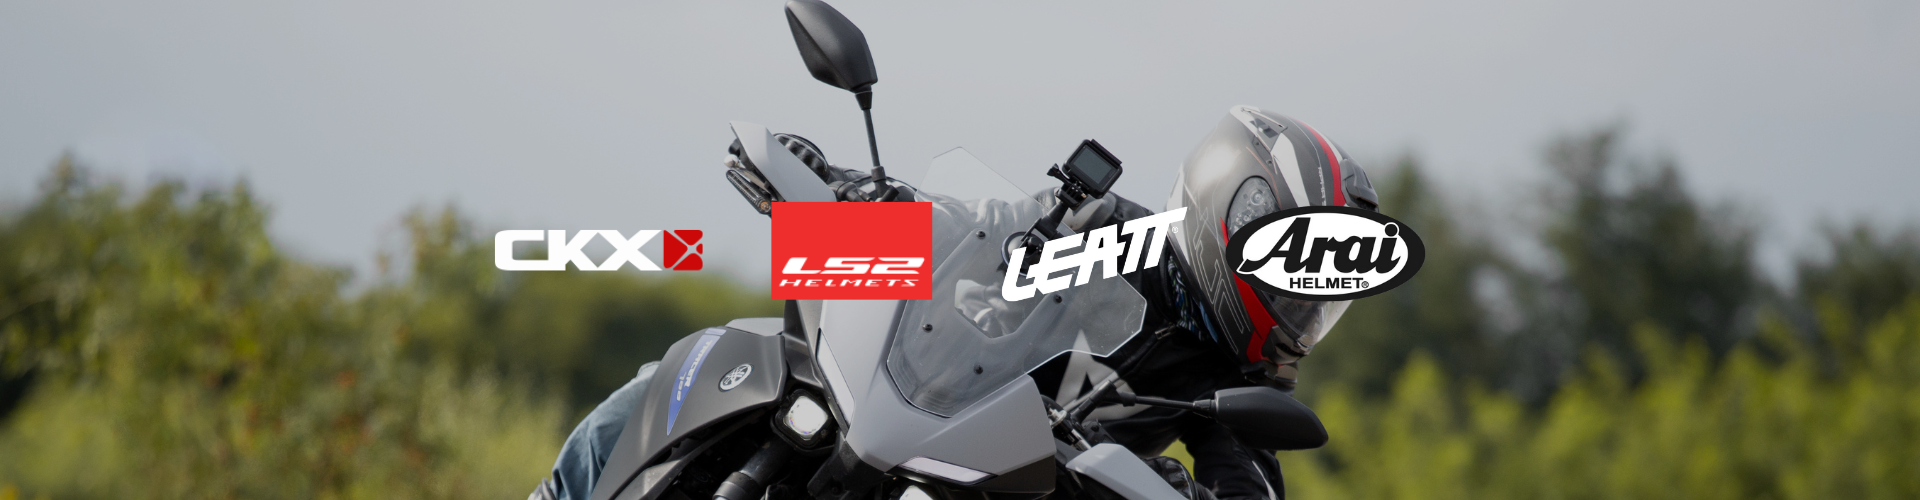 motorcycle-brands-parts-accessories